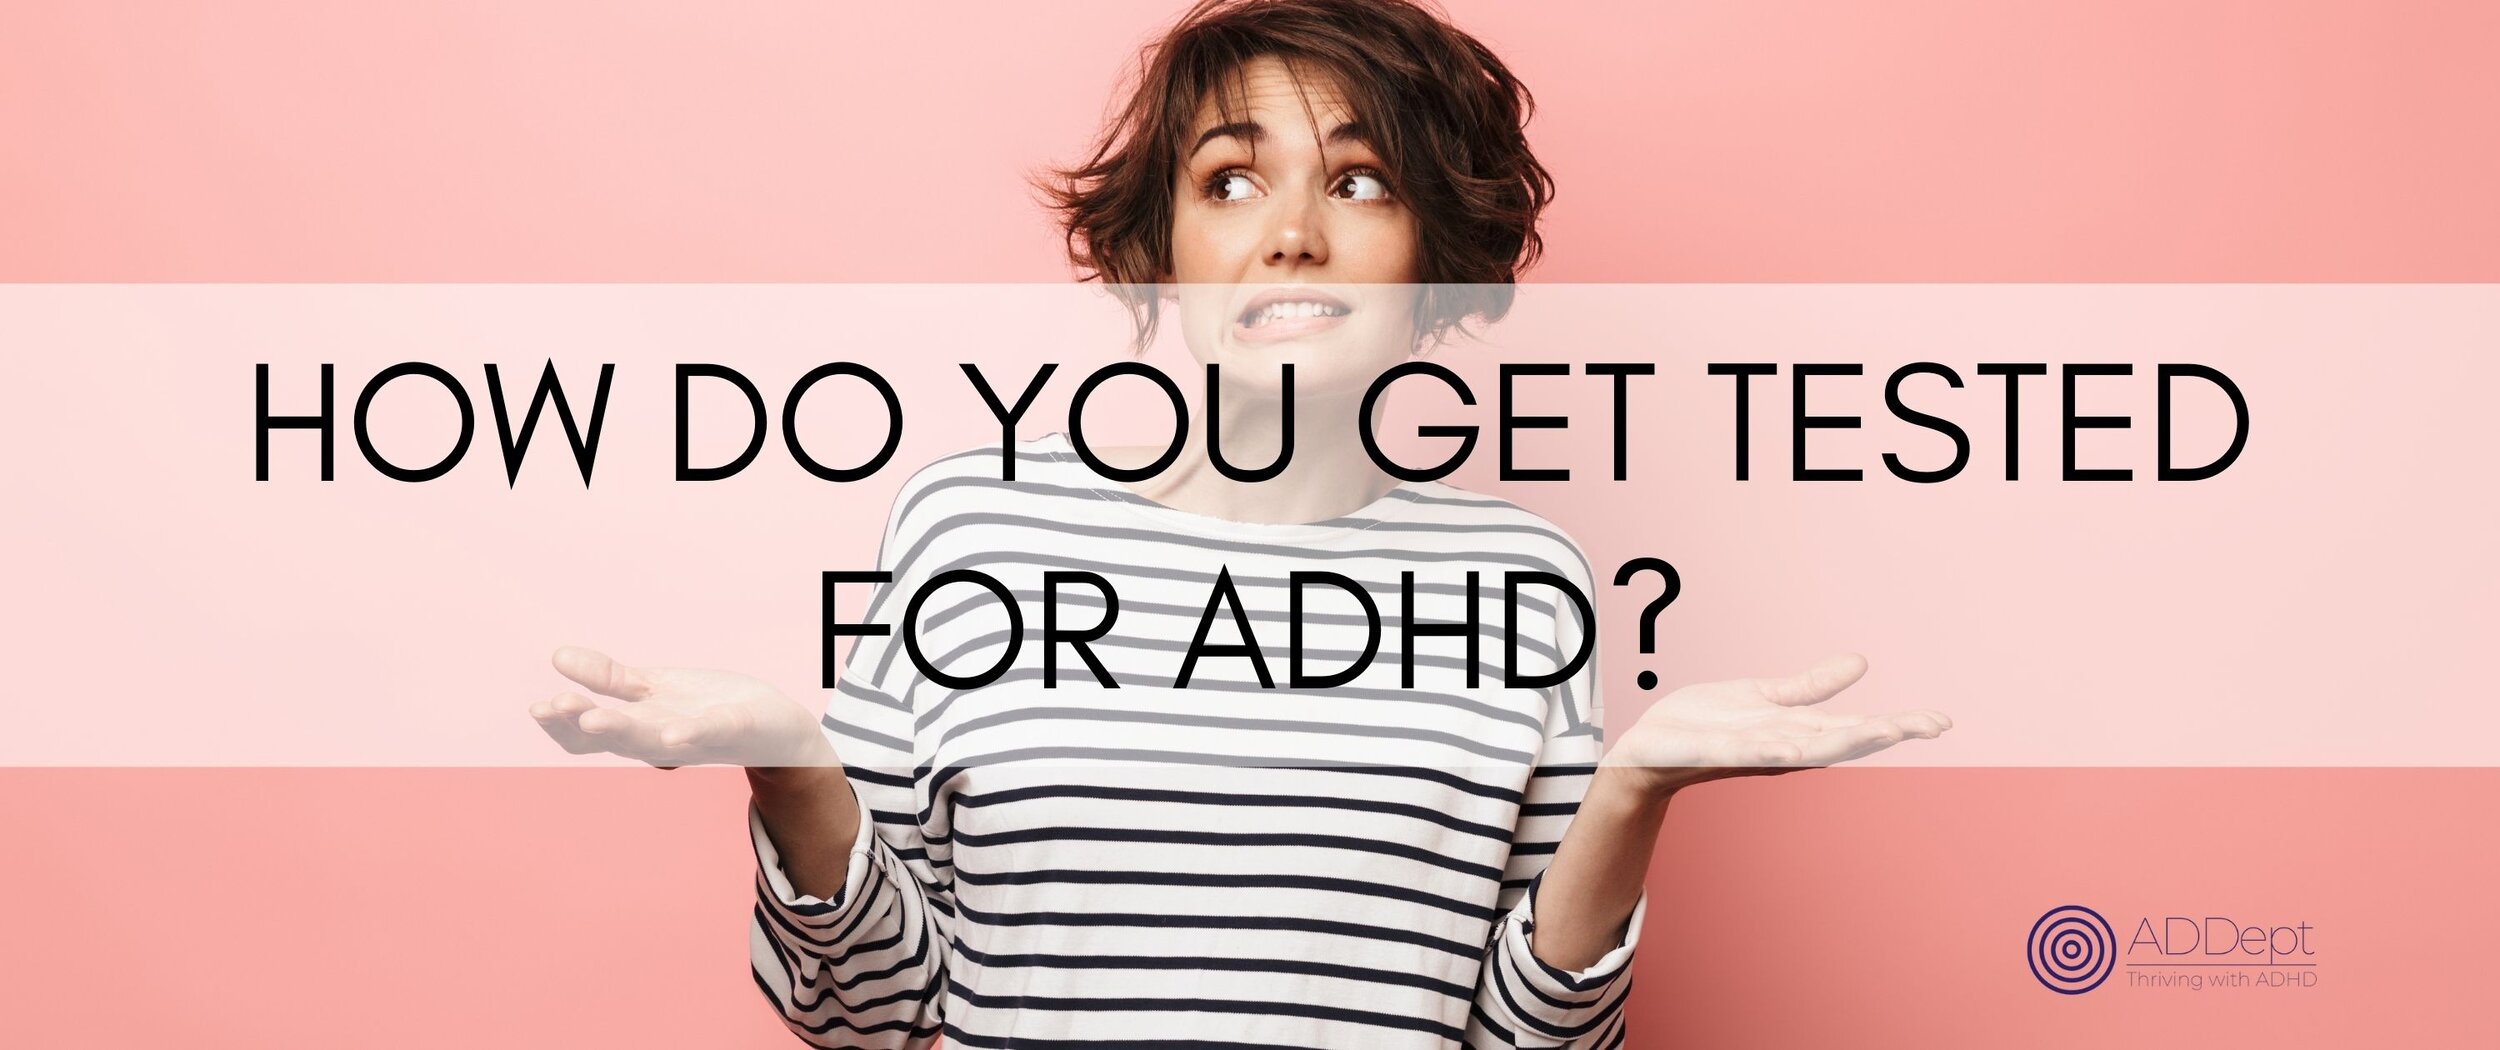 How do you get tested for ADHD? — ADDept